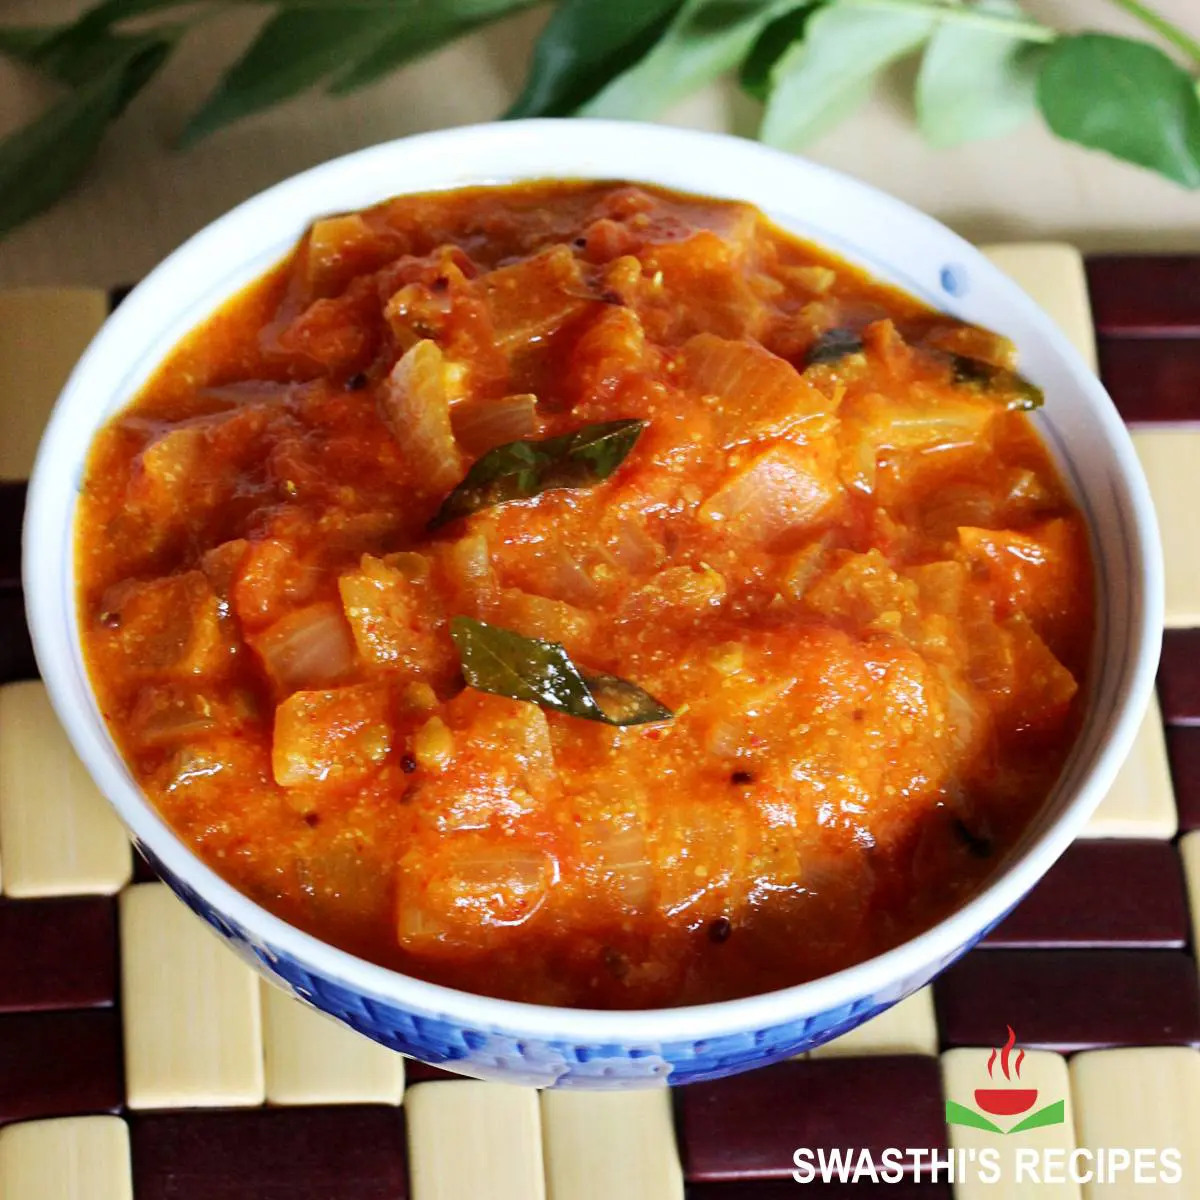 Tomato curry recipe made with fresh tomatoes, onions, spices and herbs